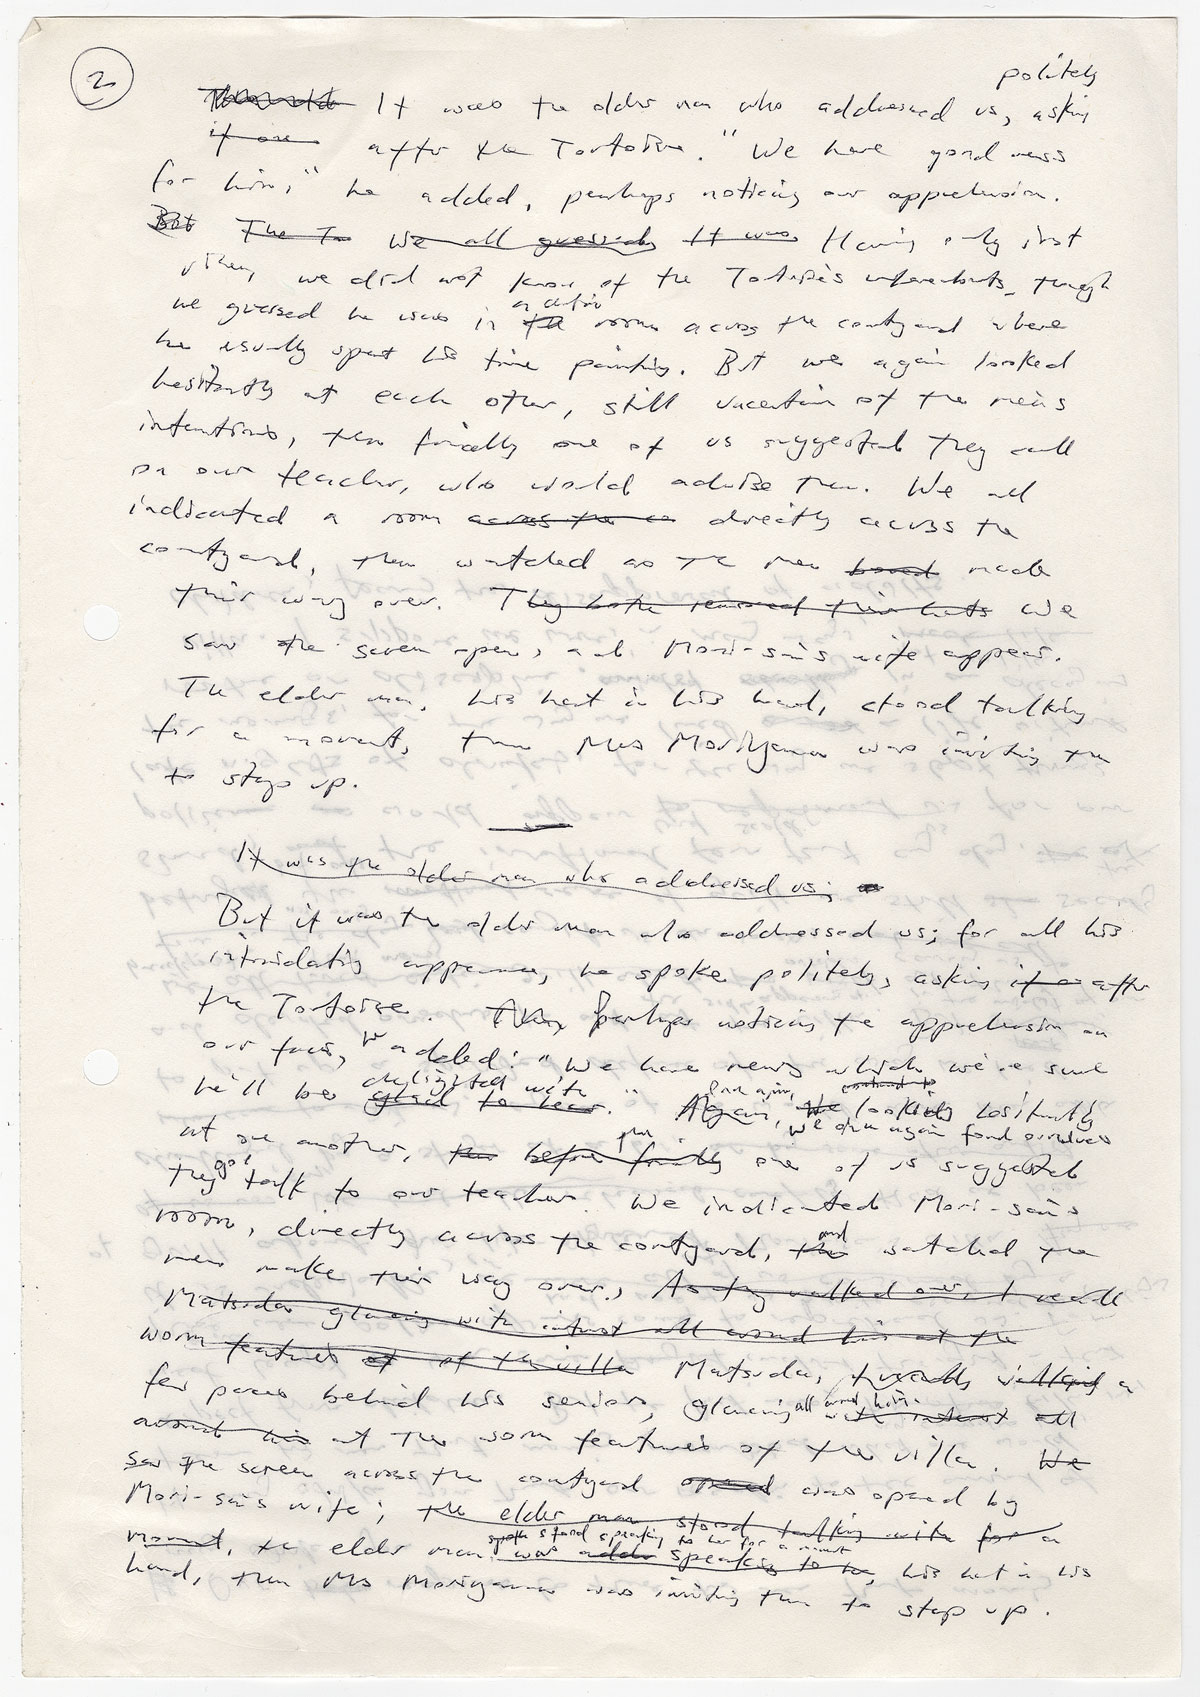 Kazuo Ishiguro's "rough" pages from "An Artist of the Floating World." Courtesy of Harry Ransom Center.